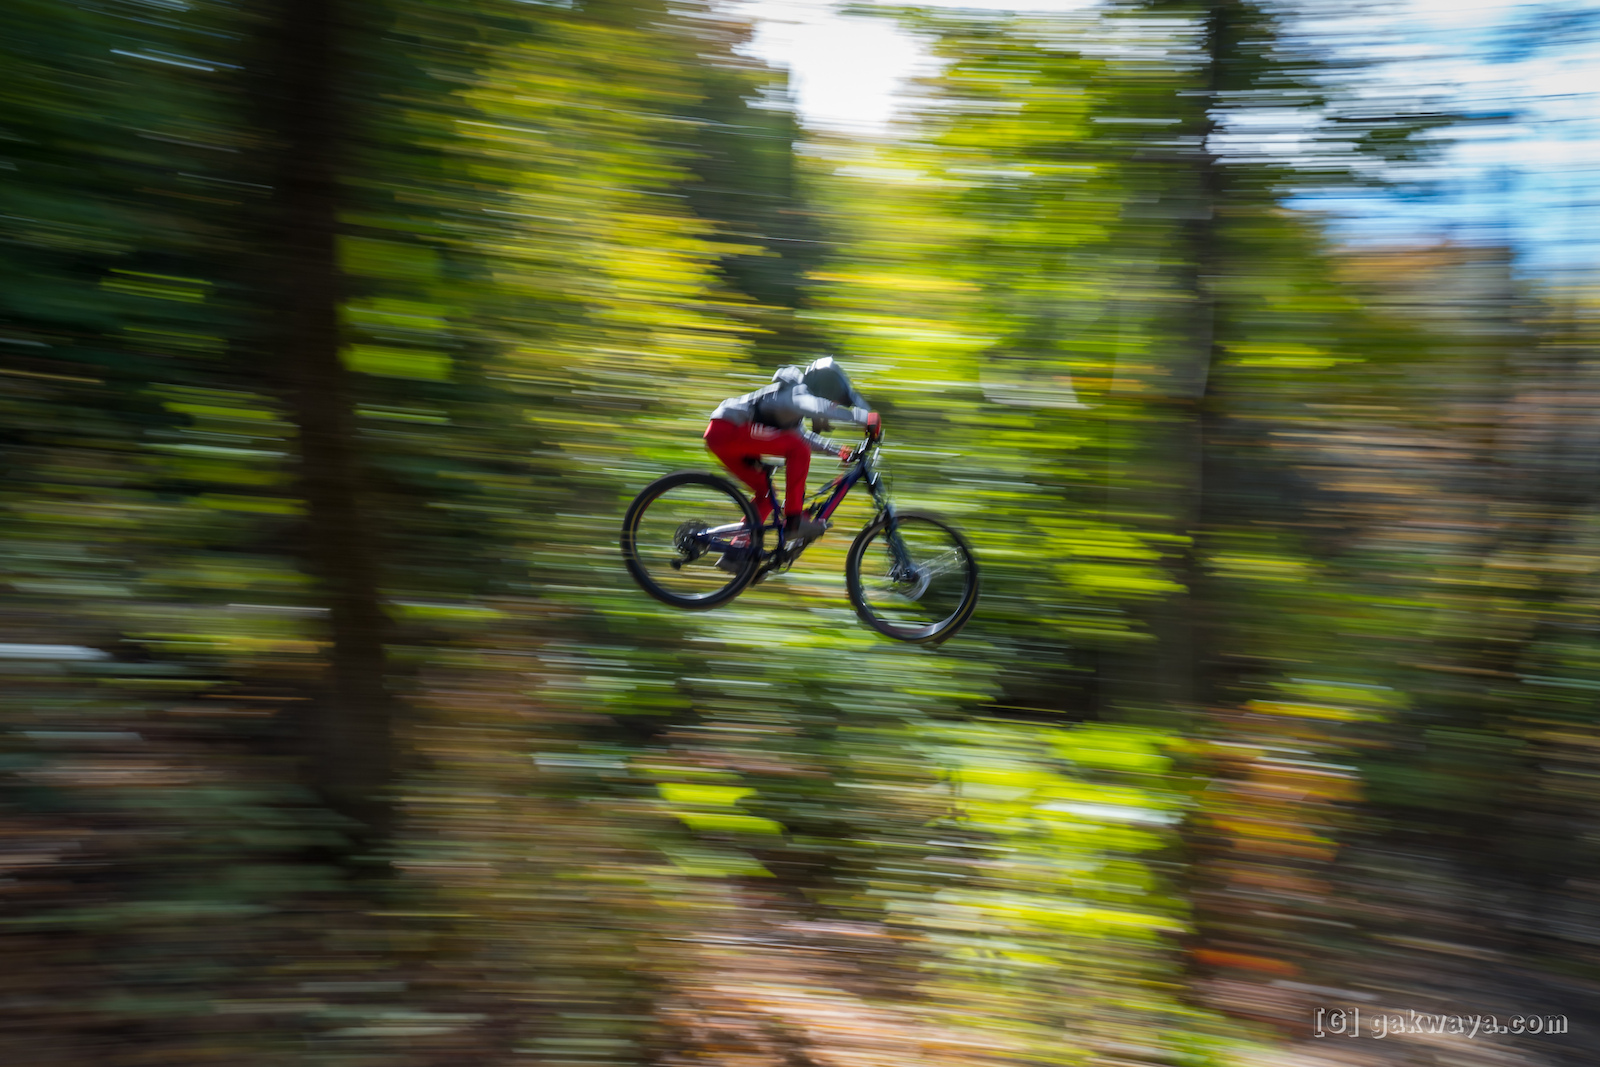 Air DH, Whip-Off and Best Trick durant le Marmota Fest 2021. Quebec City Mountain Biking. Rider: Théo Bédard.